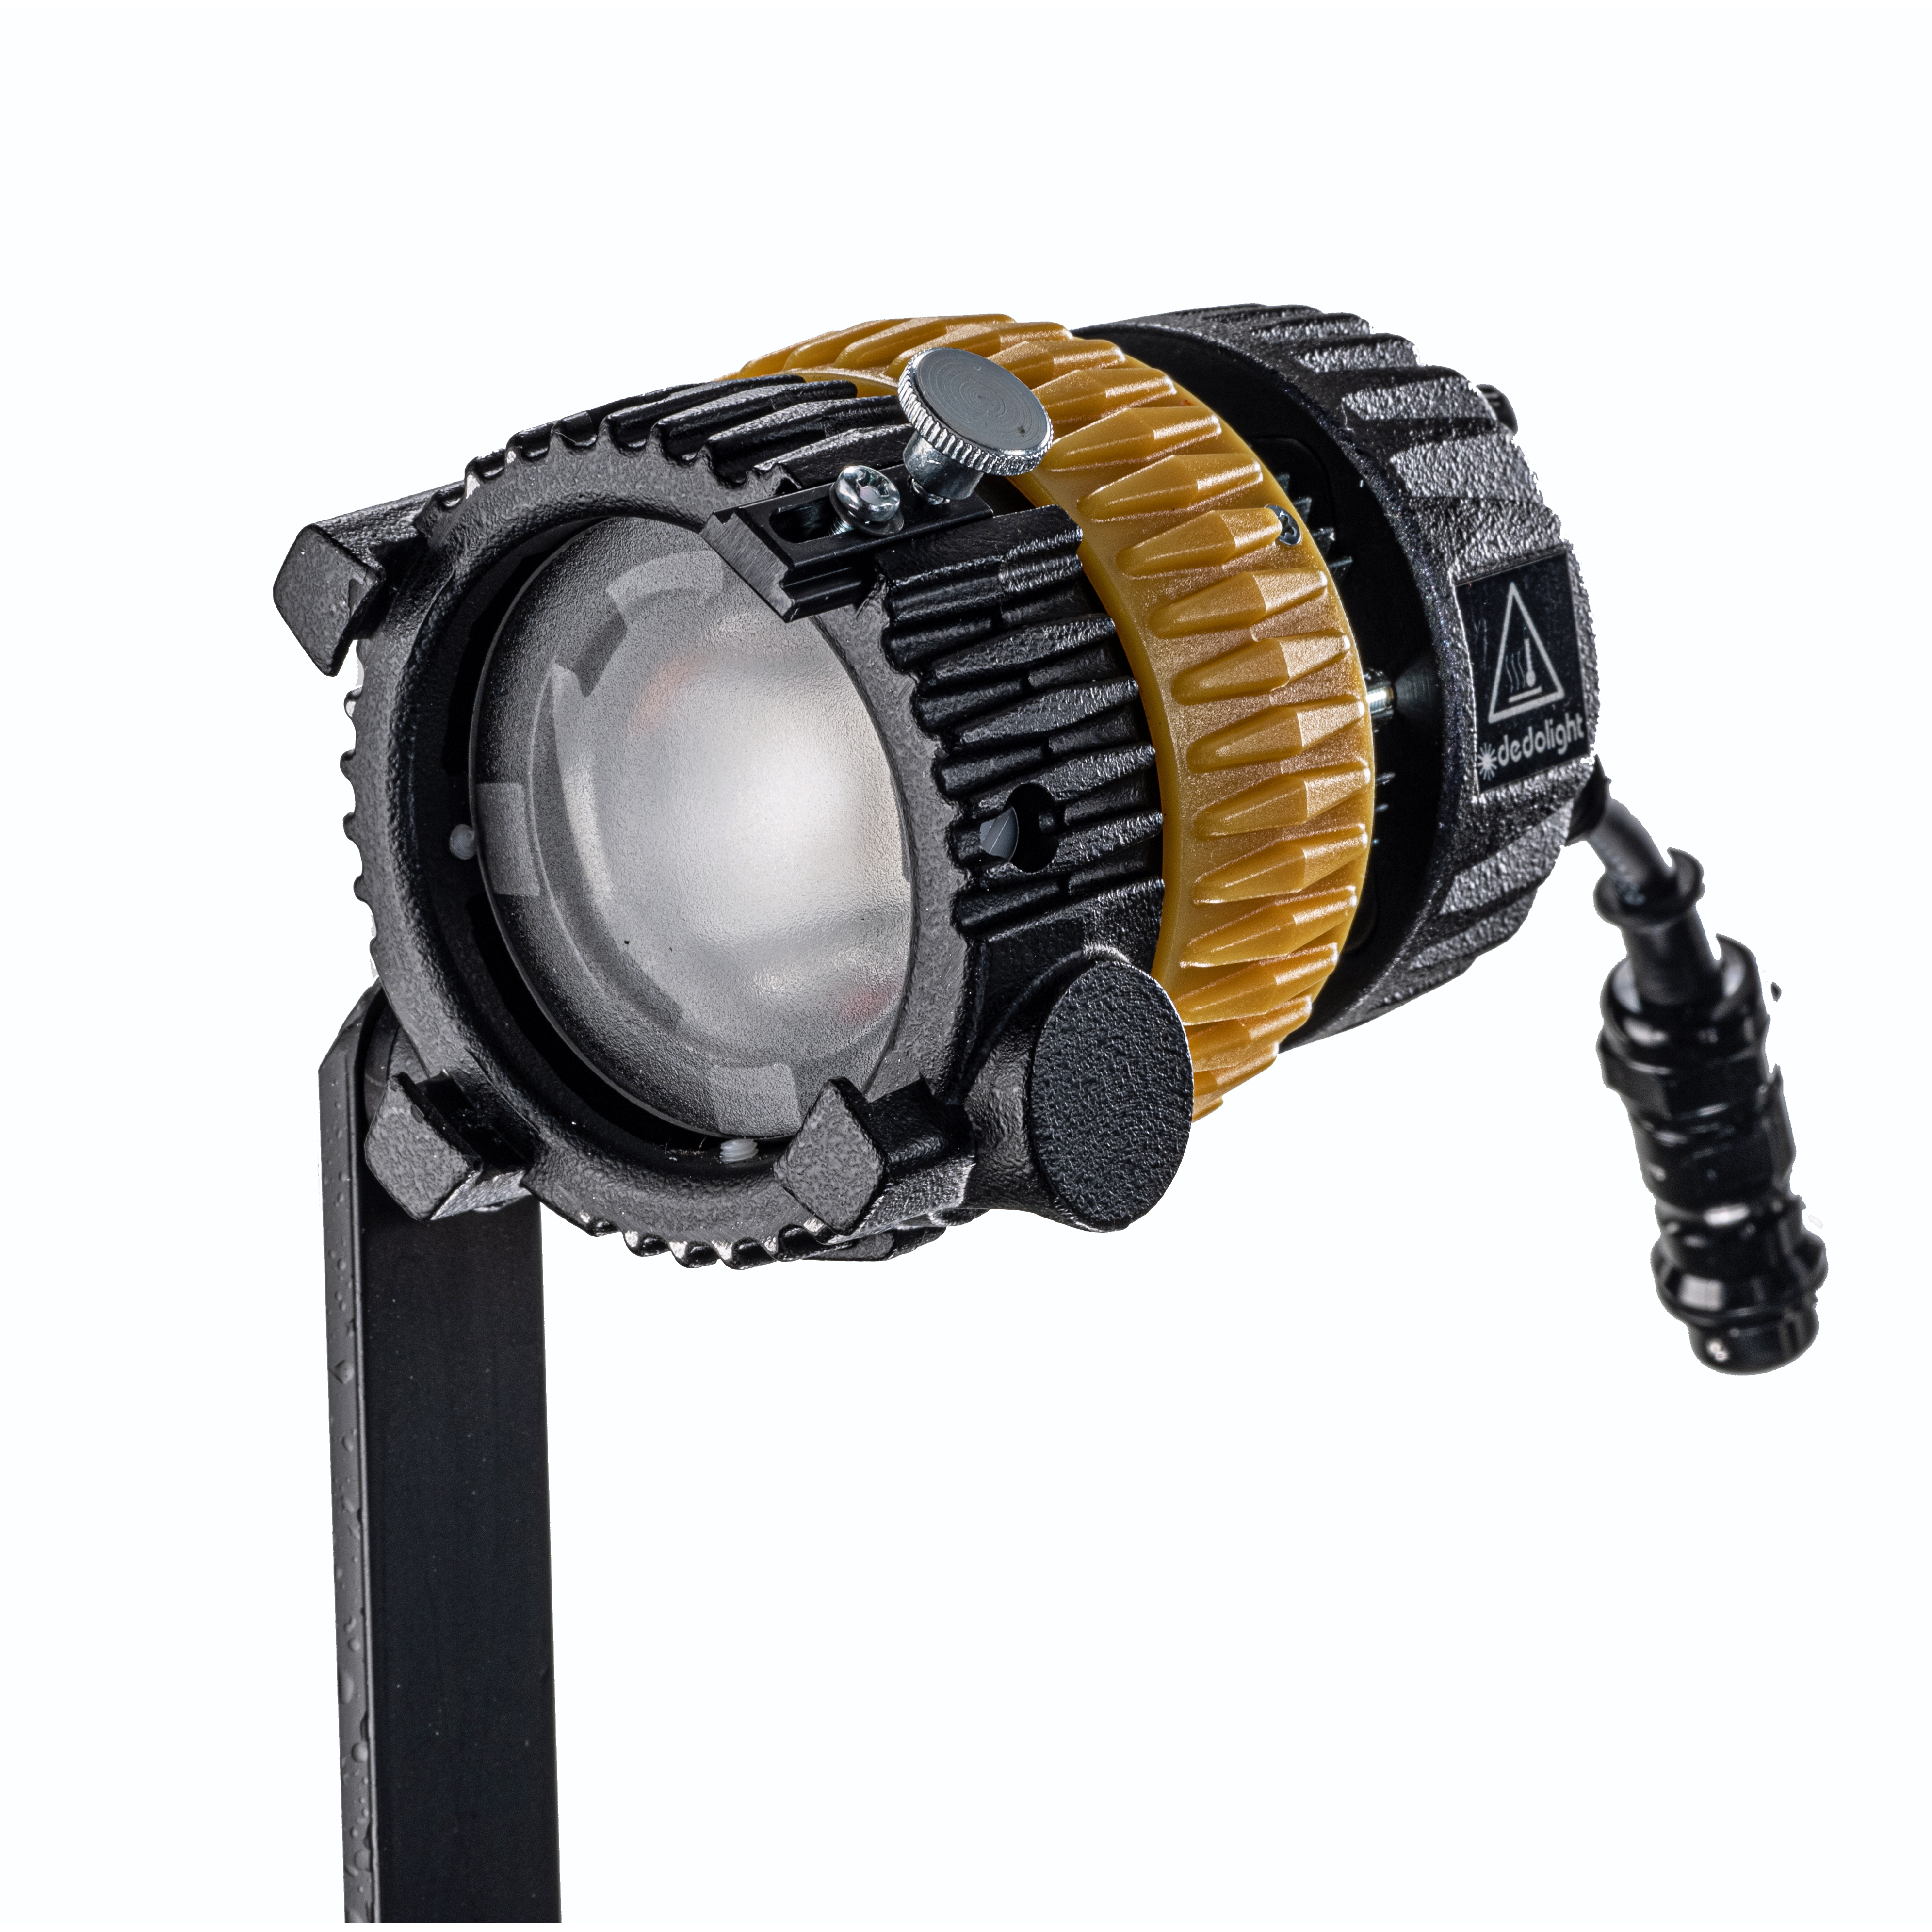 Dedolight NEO  DLED3N-D  - fokussierbare 40W Turbo LED Tageslicht Leuchte